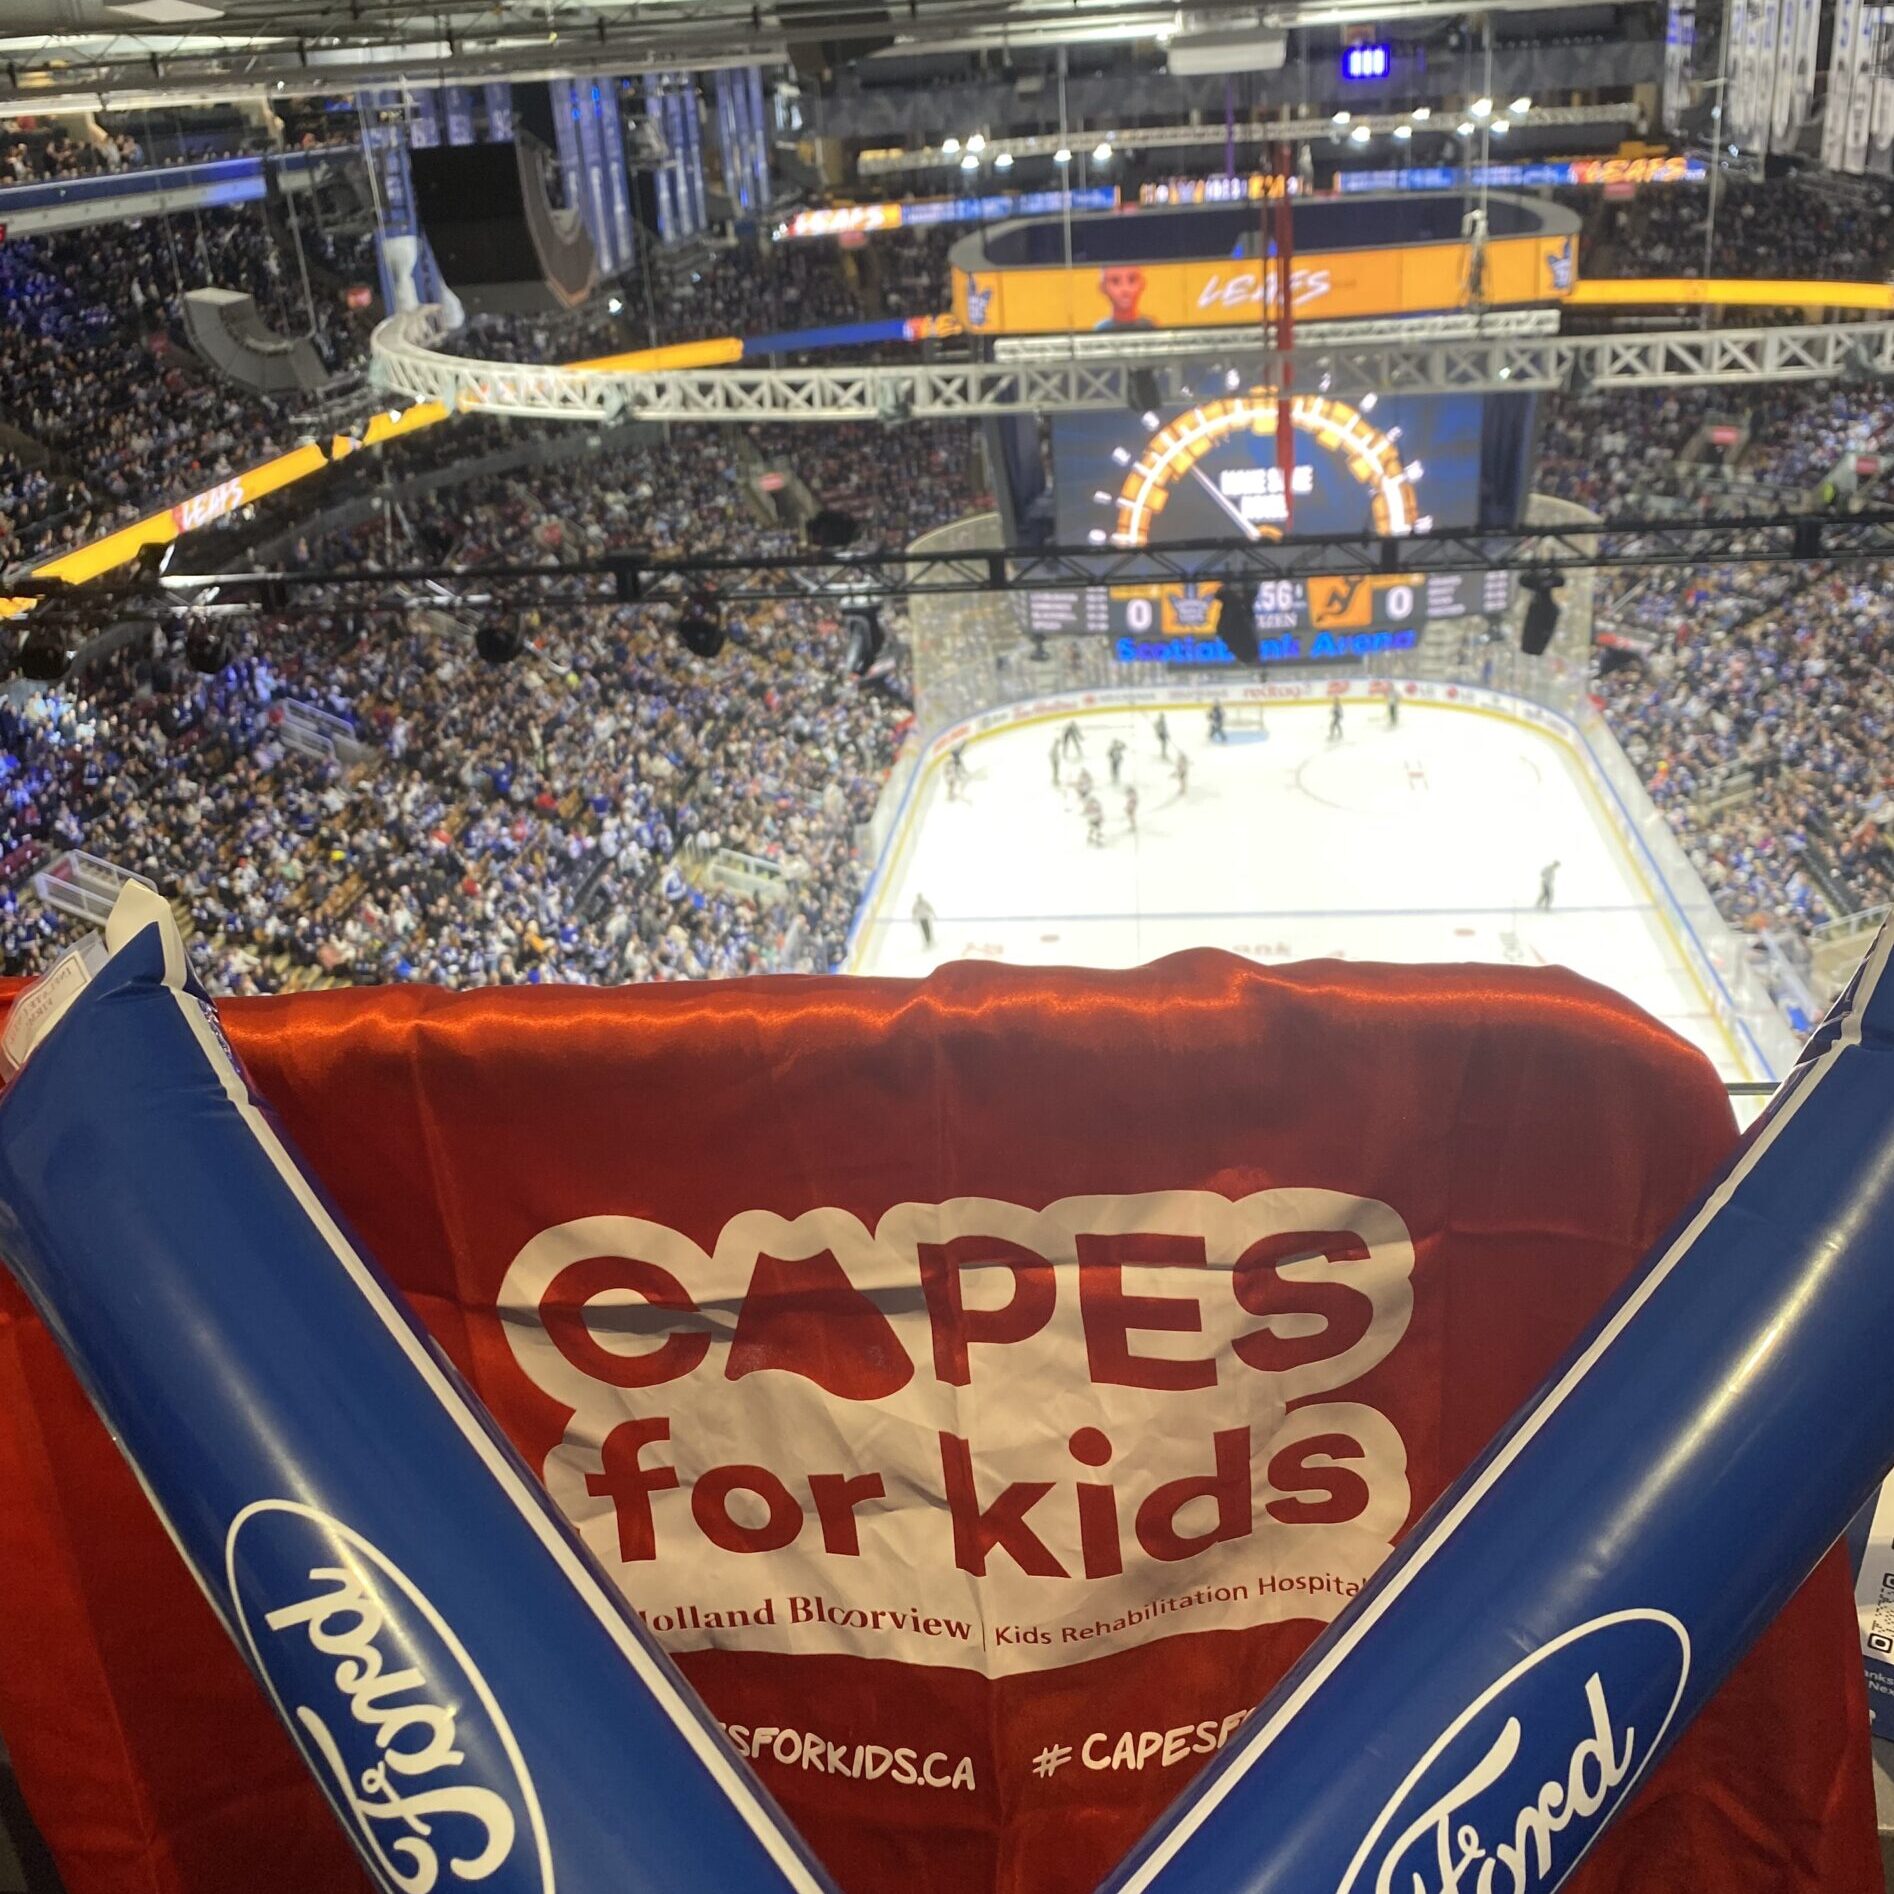 The view from a seat high up in a hockey area. A red cape with "Capes for Kids" logo and two blue noise maker sticks.